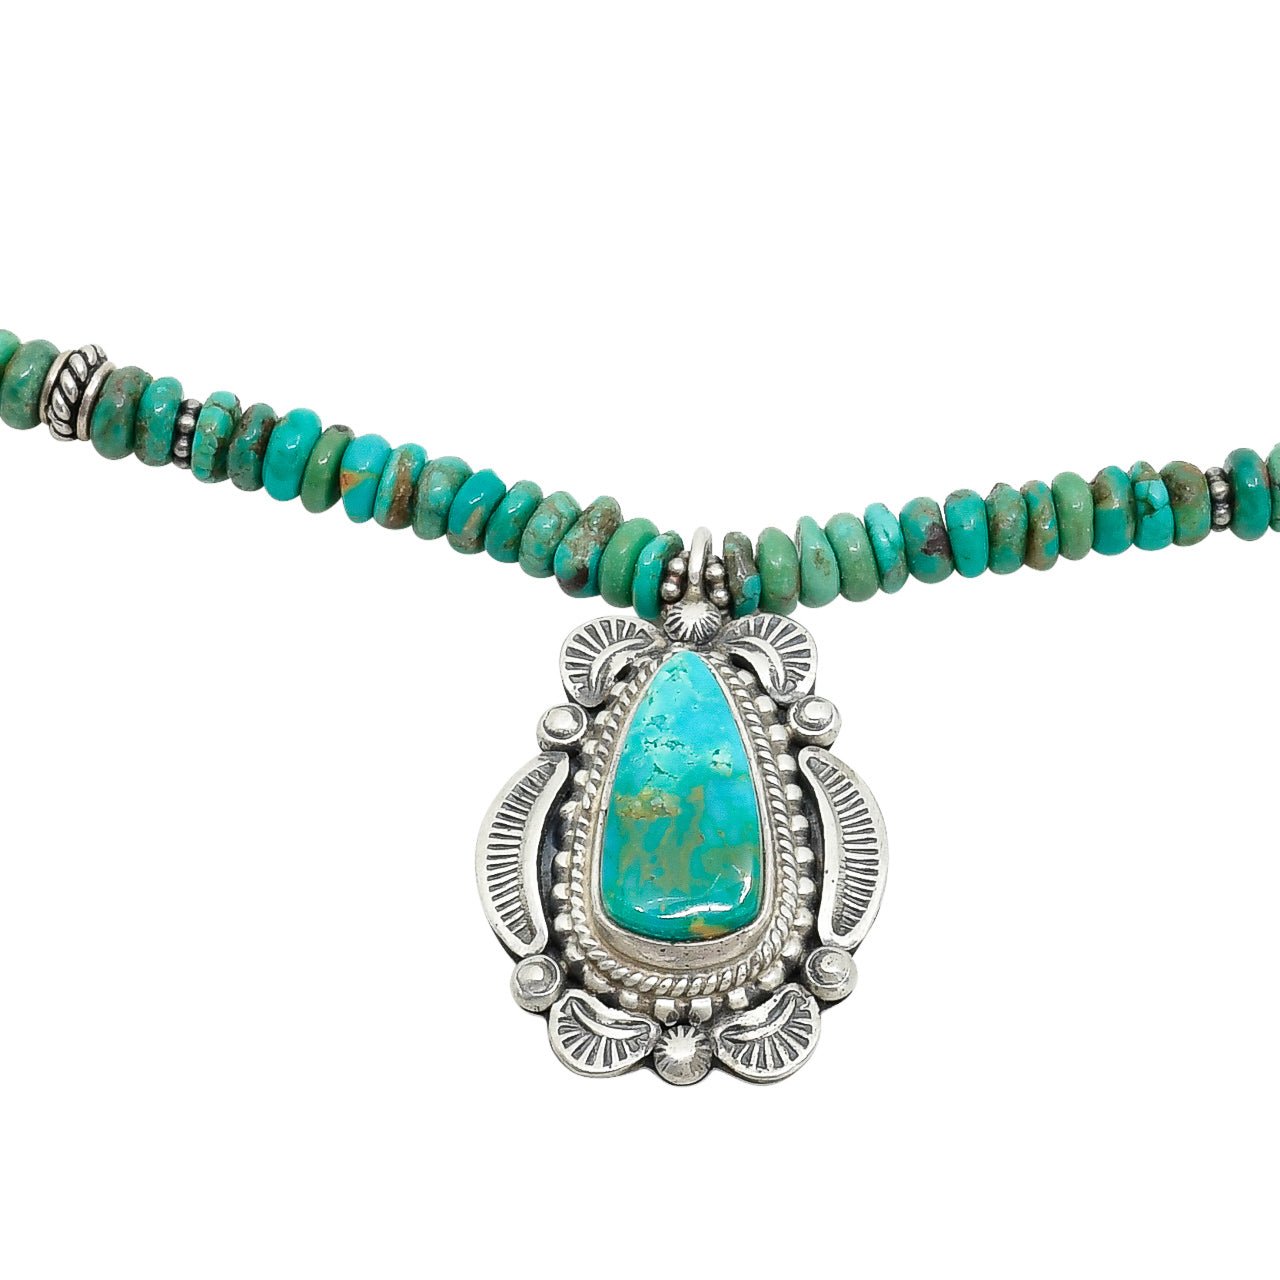 Navajo Necklace of Turquoise Beads With Turquoise Pendant - Turquoise & Tufa